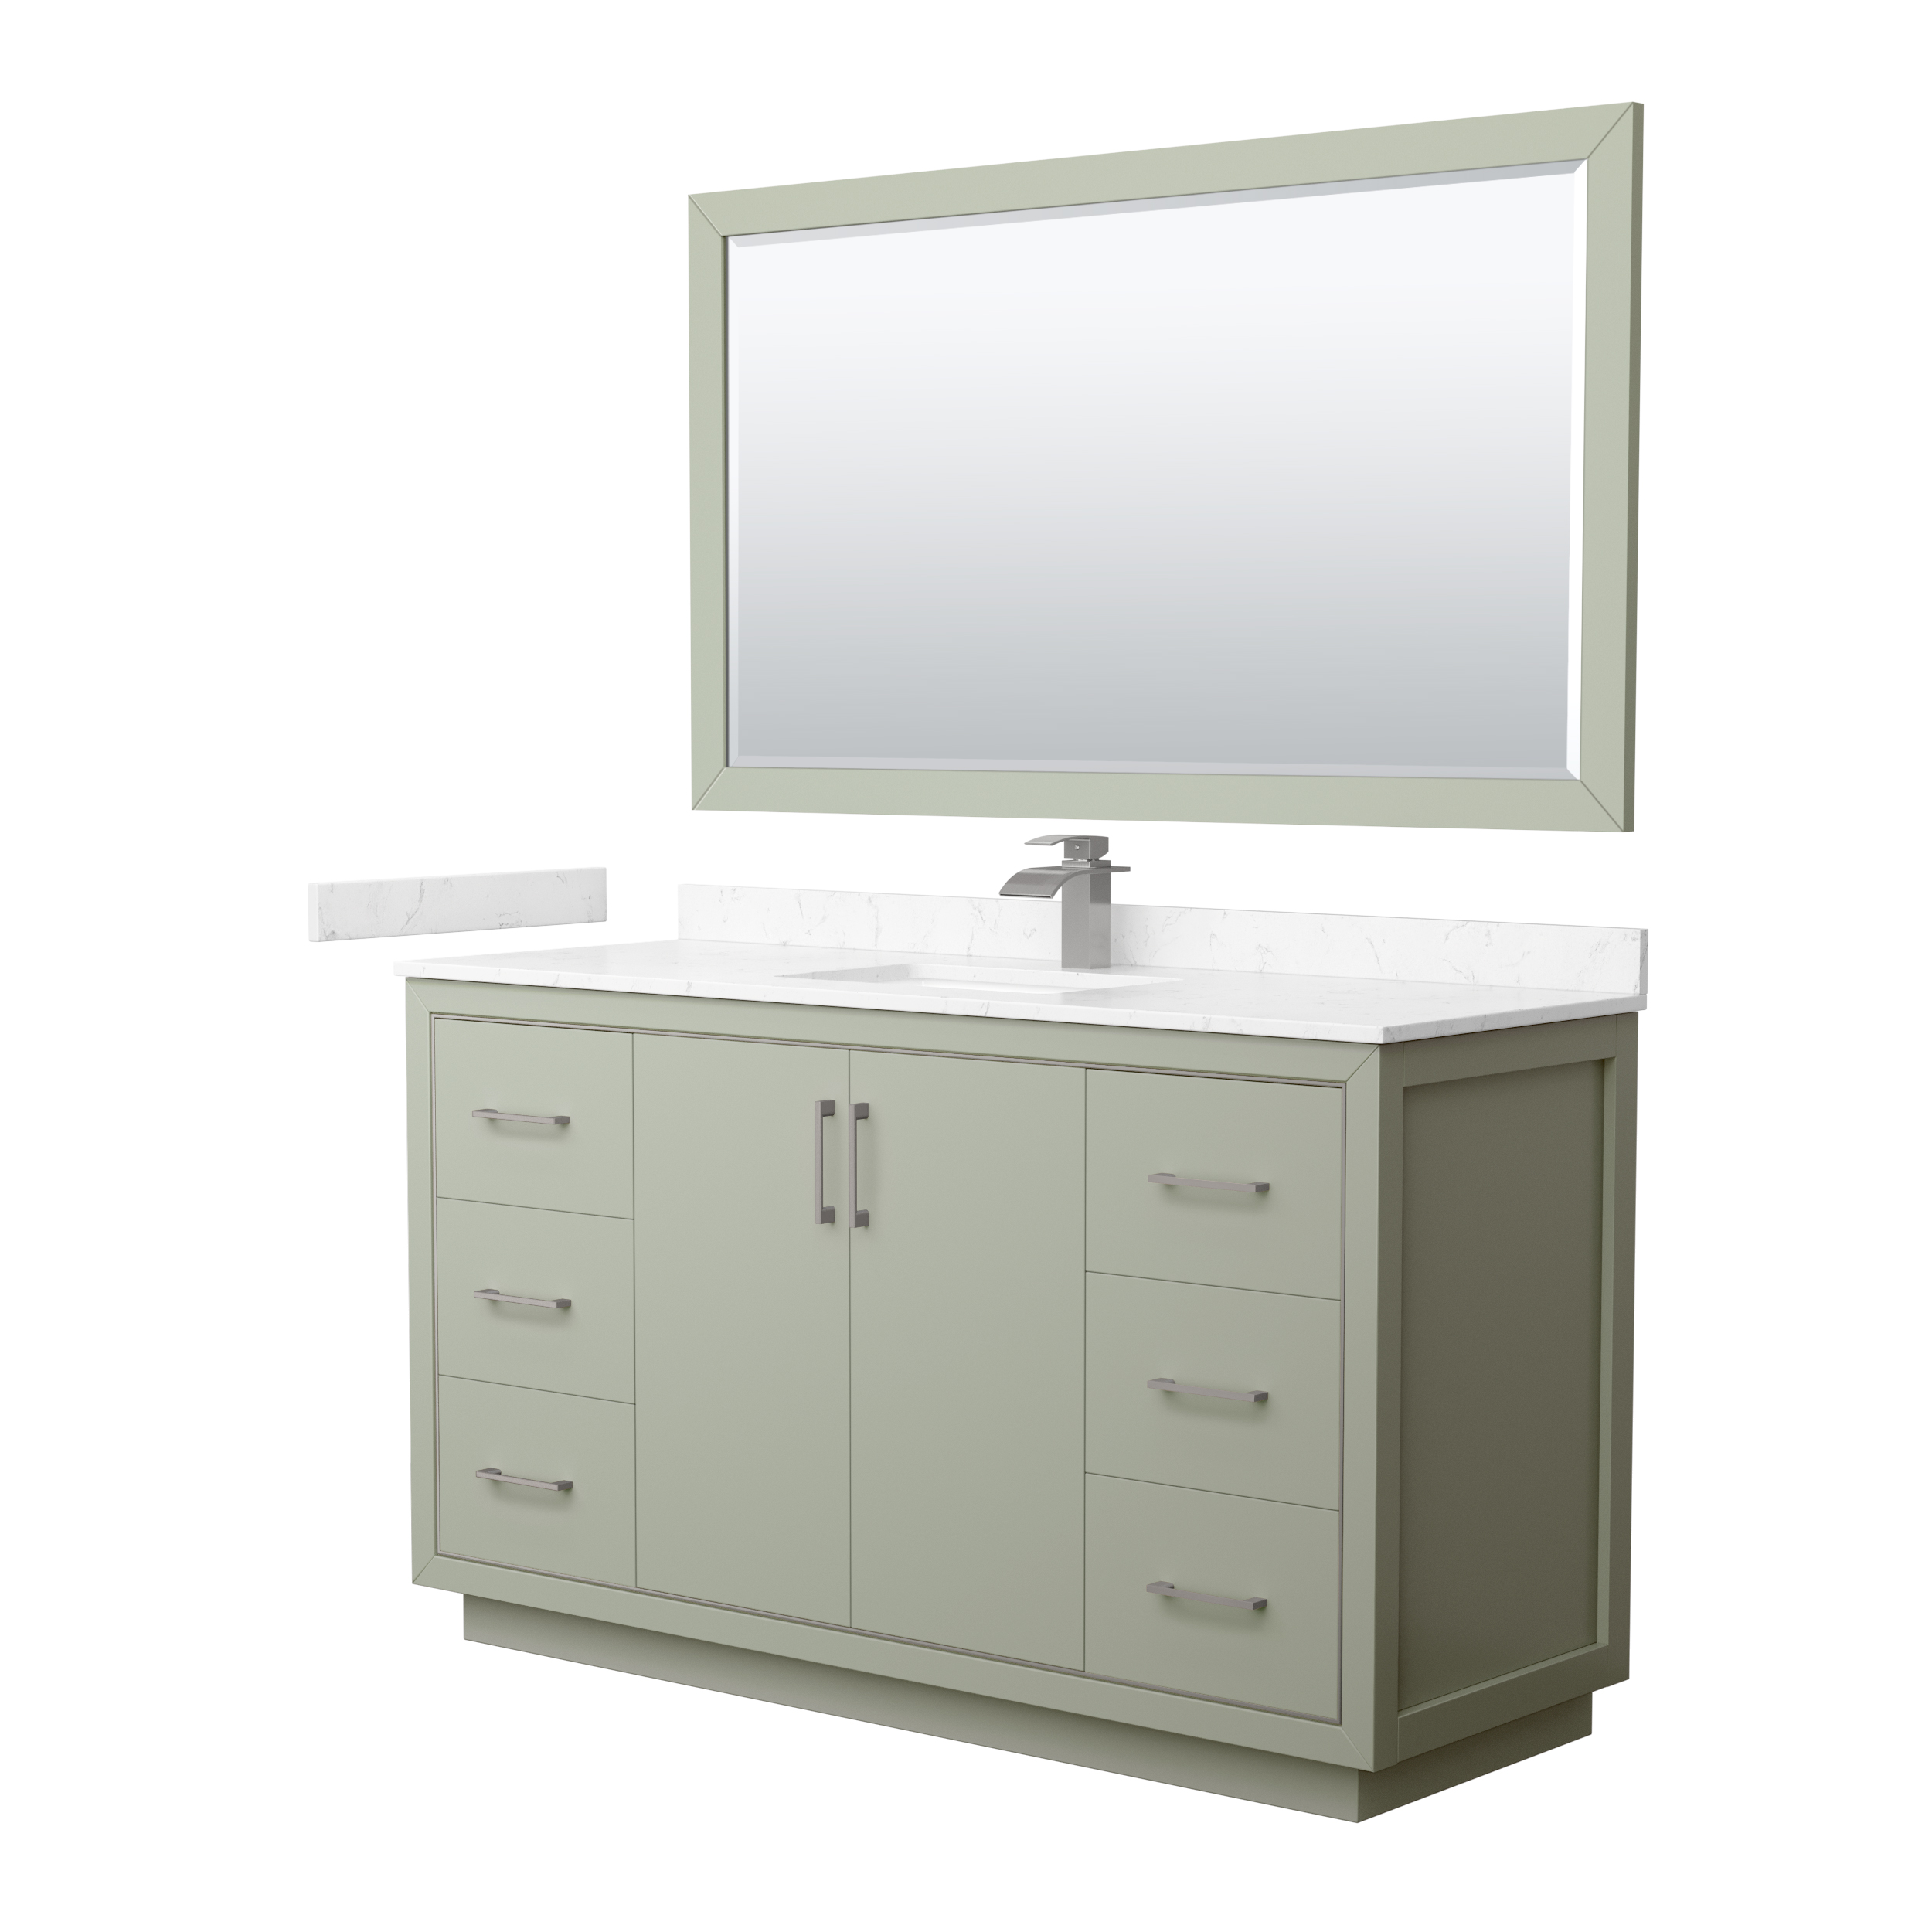 Icon 60" Single Vanity with optional Cultured Marble Counter - Light Green WC-1111-60-SGL-VAN-LGN-